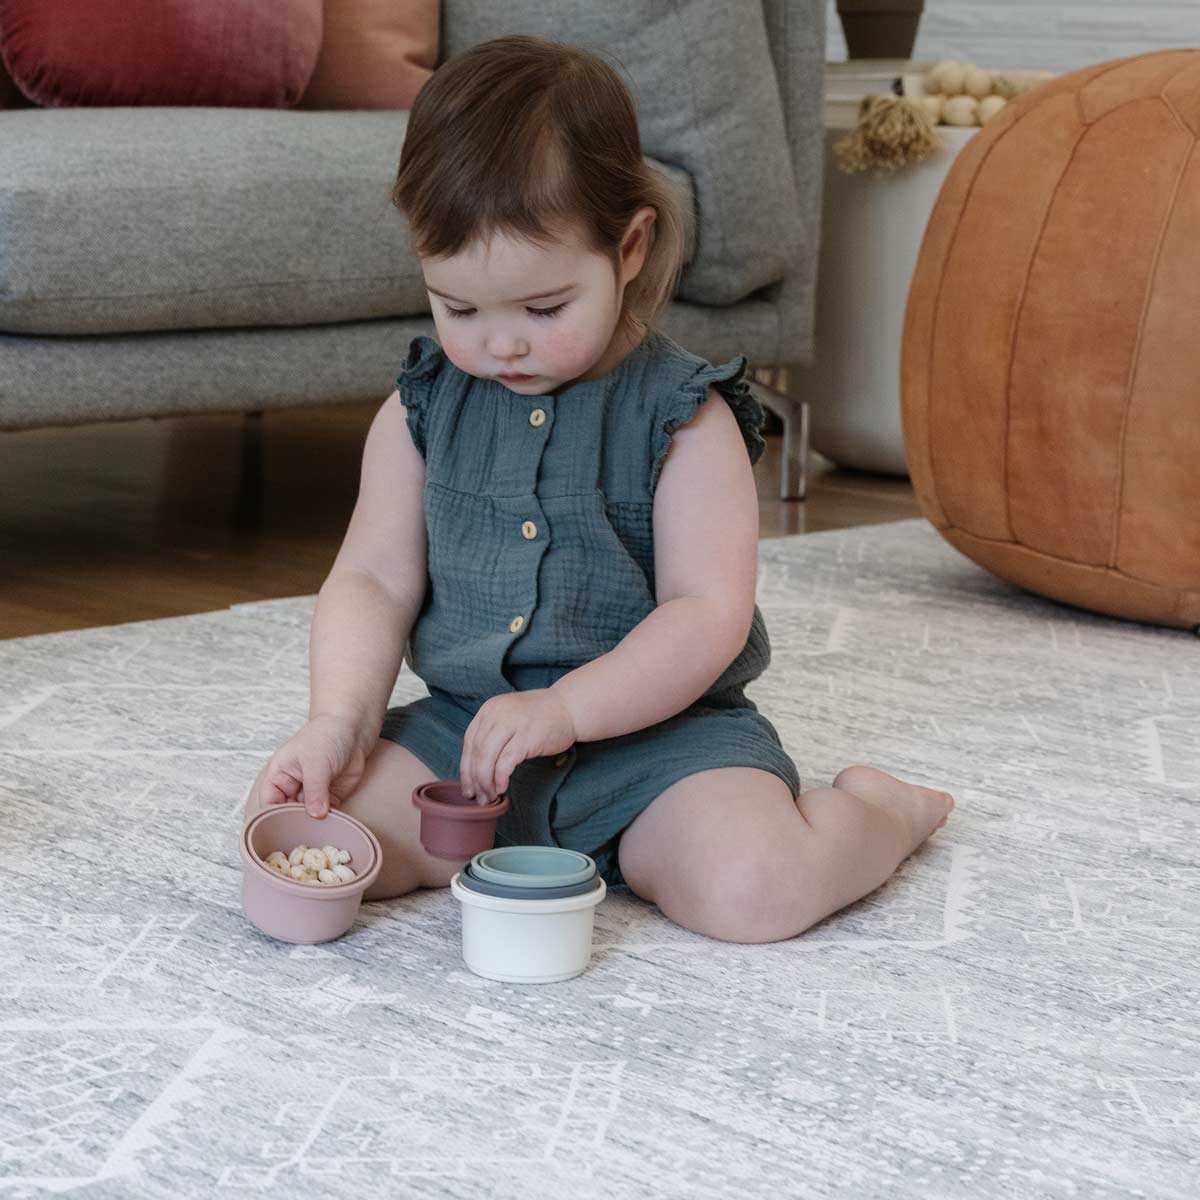 Little Nomad baby play mat in Ula Gray neutral boho print. Shown in living room with baby playing with toys.